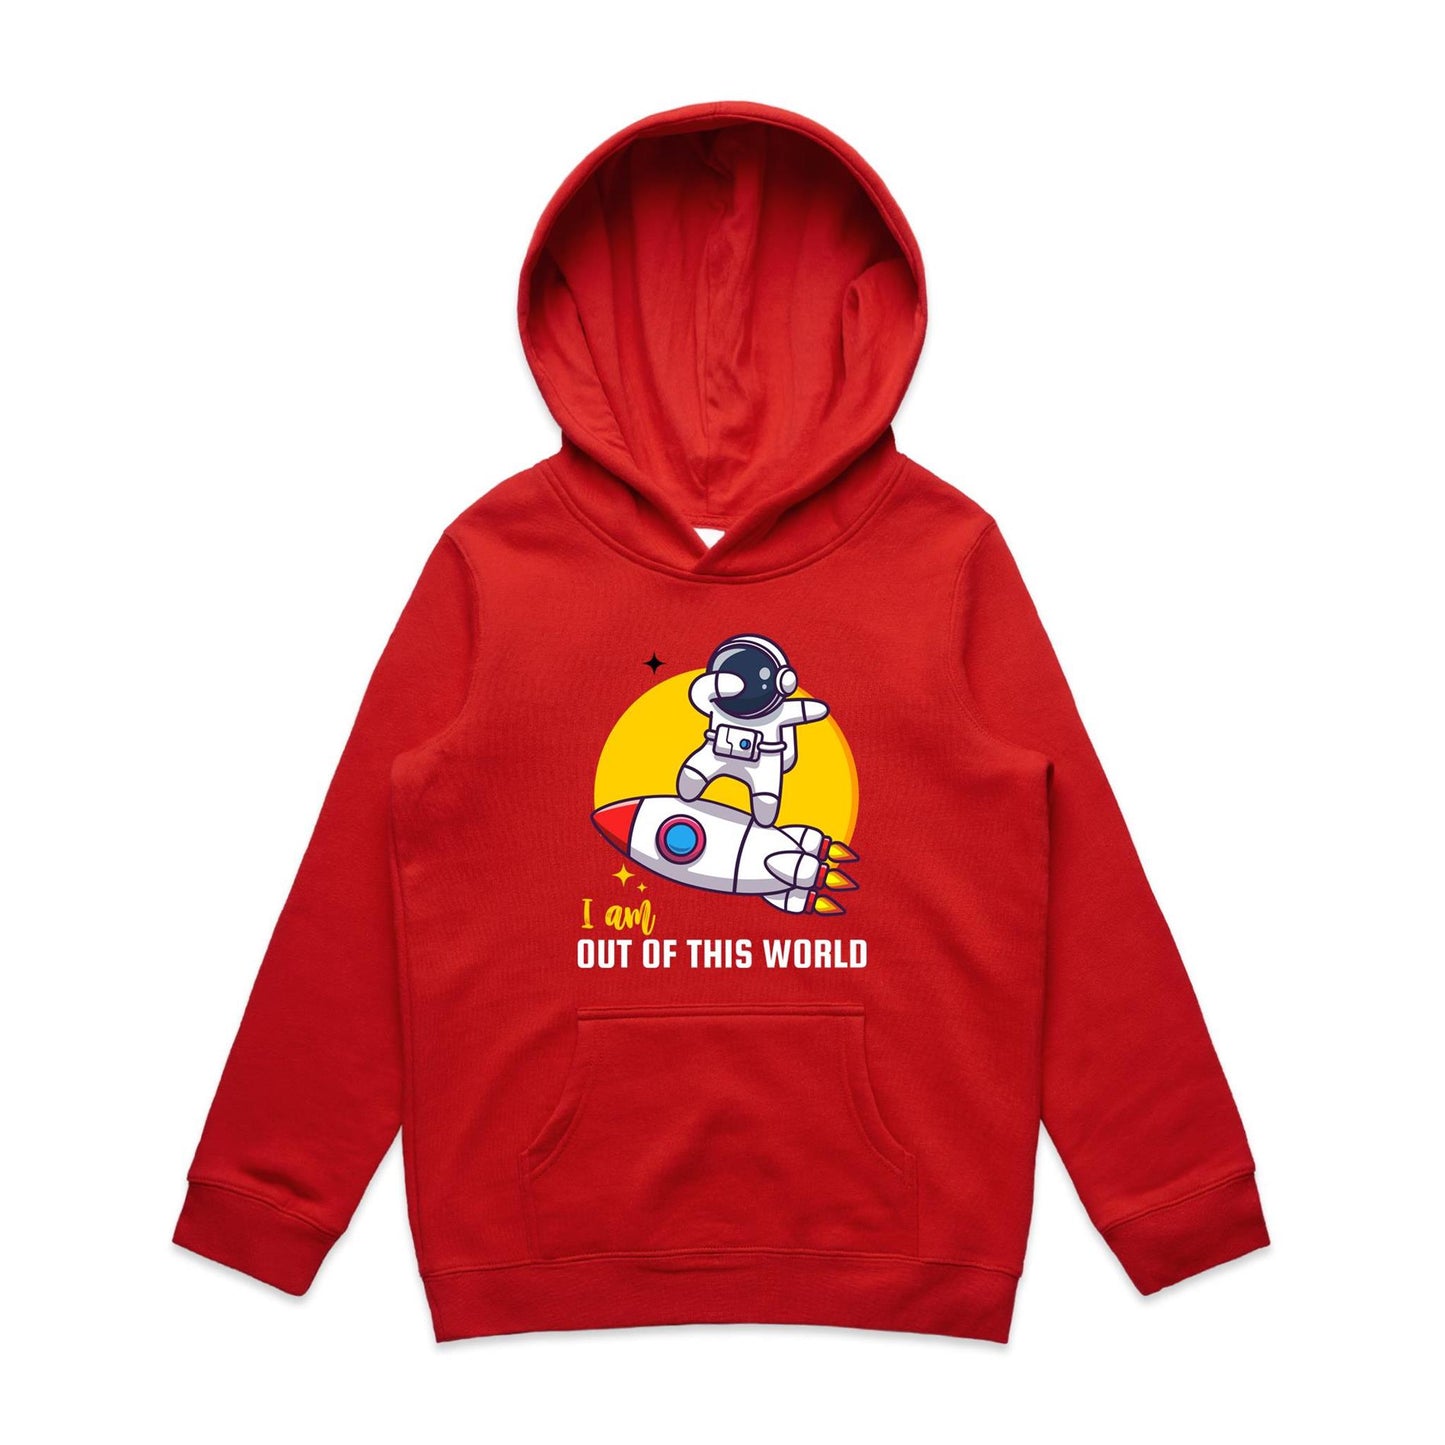 I Am Out Of This World, Astronaut - Youth Supply Hood Red Kids Hoodie Sci Fi